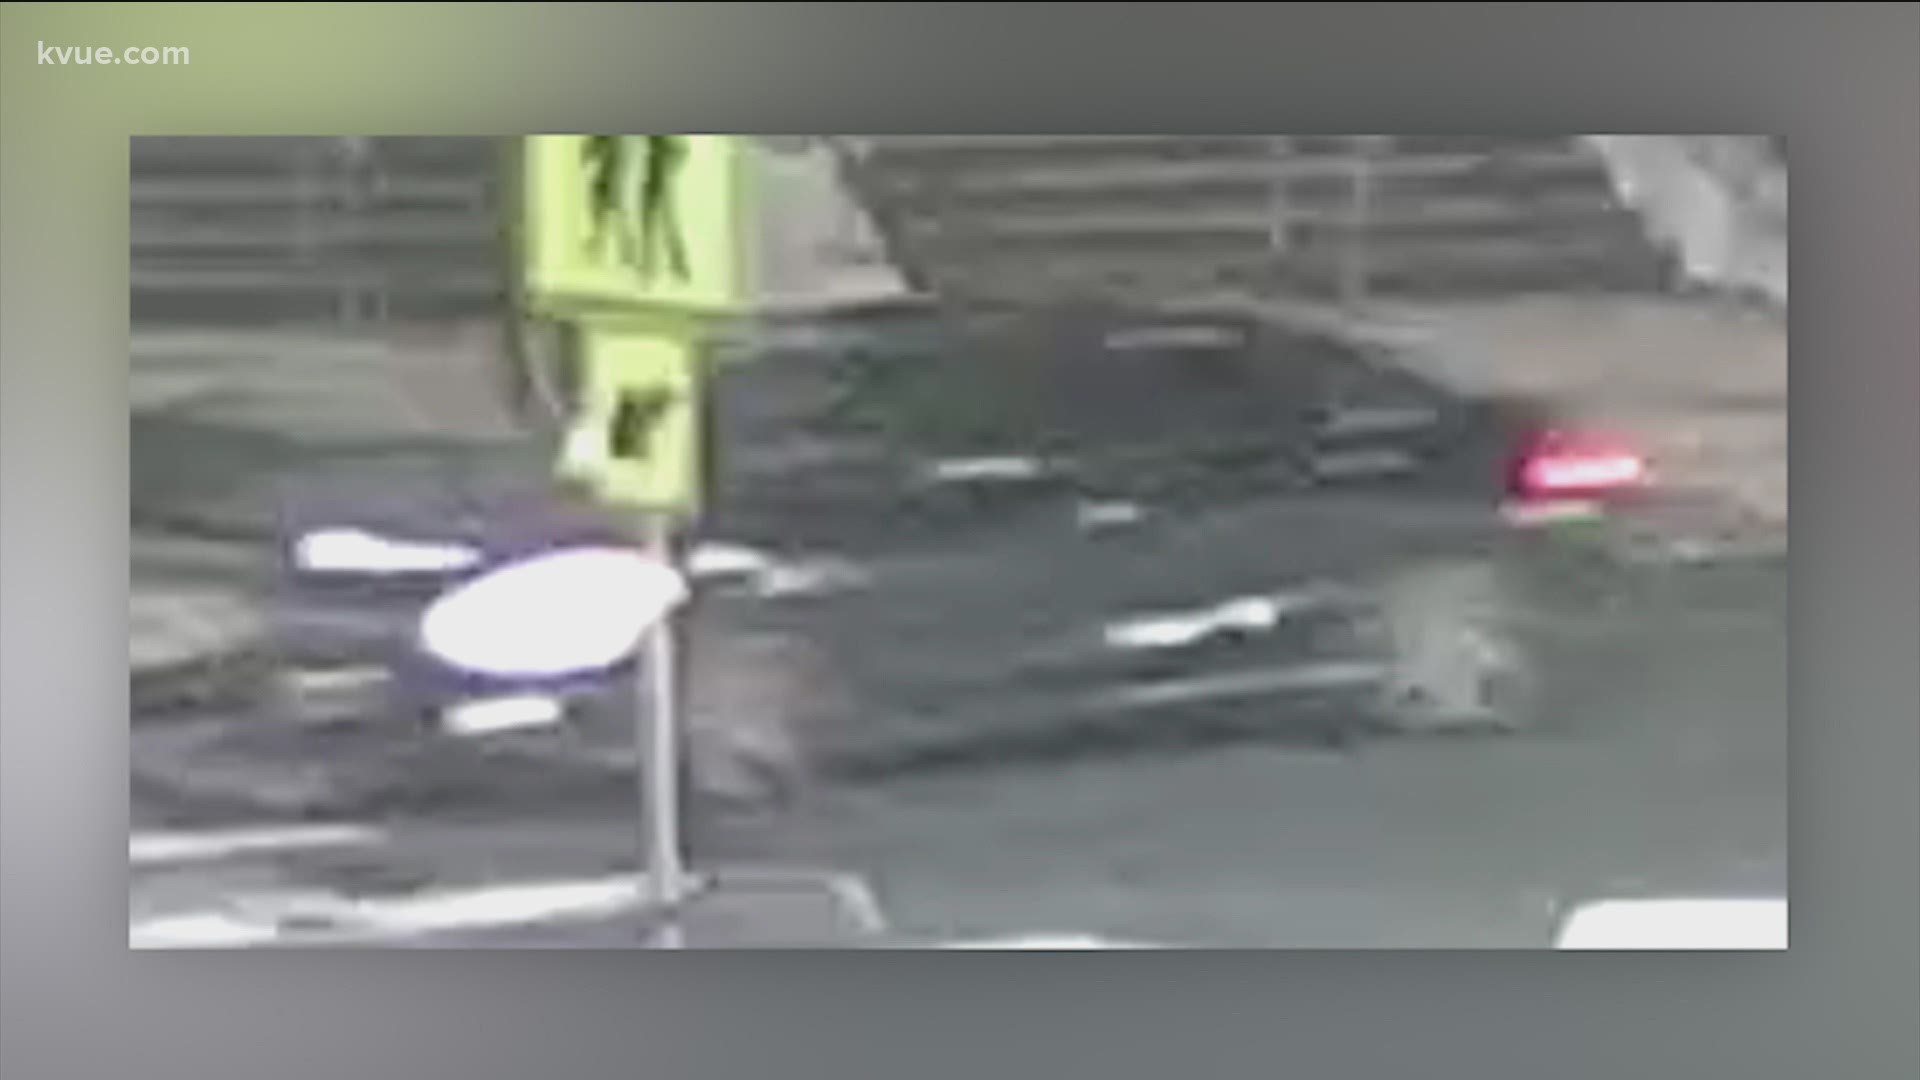 The Austin Police Department is asking for the public’s assistance in identifying a suspect involved in a drive-by shooting in East Austin on Saturday morning.